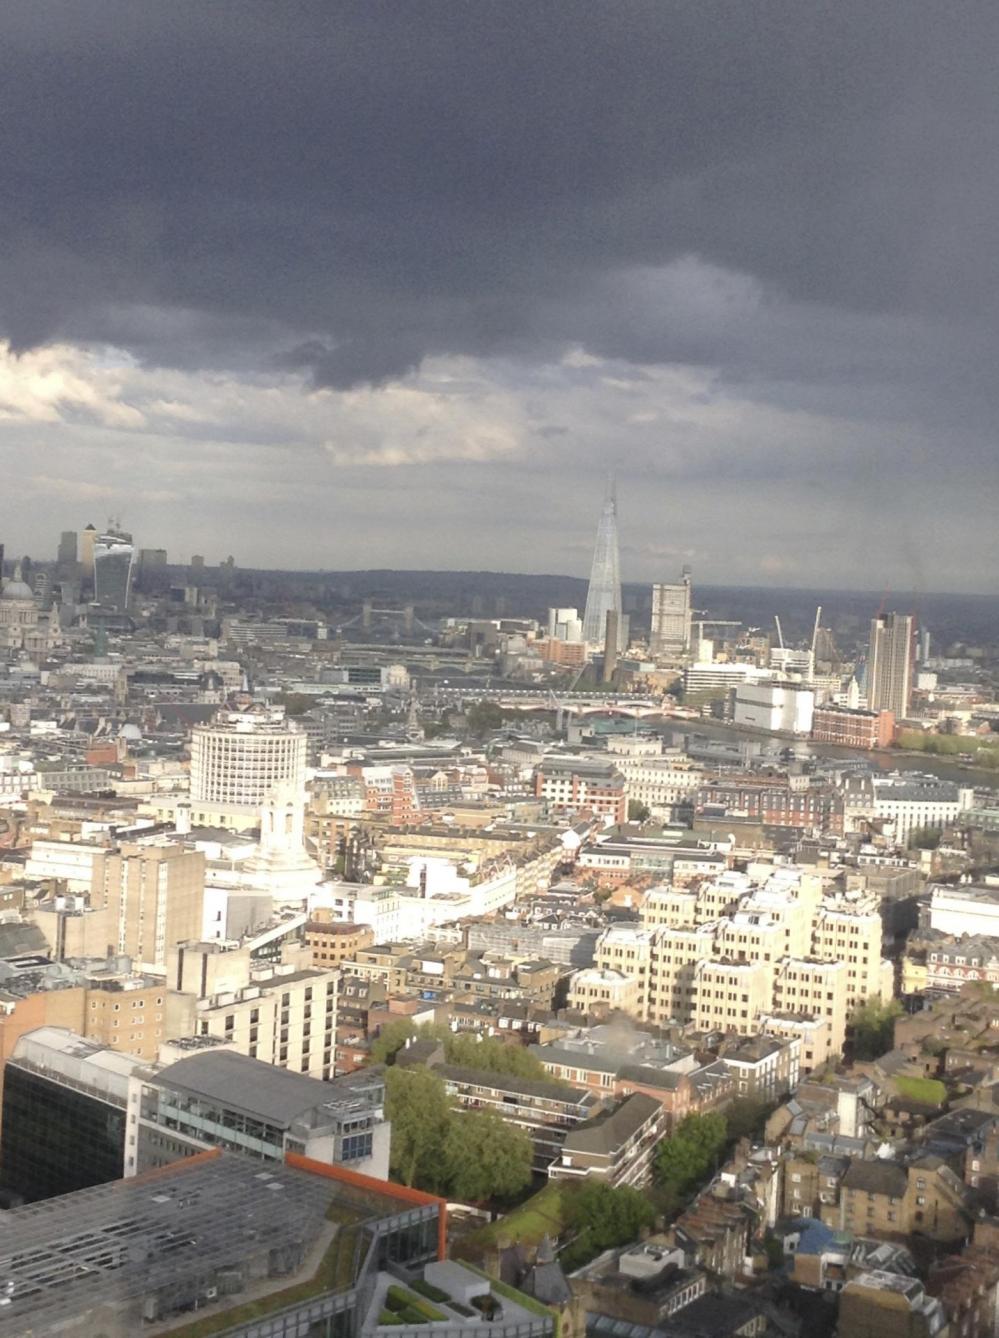 The view from Centre Point